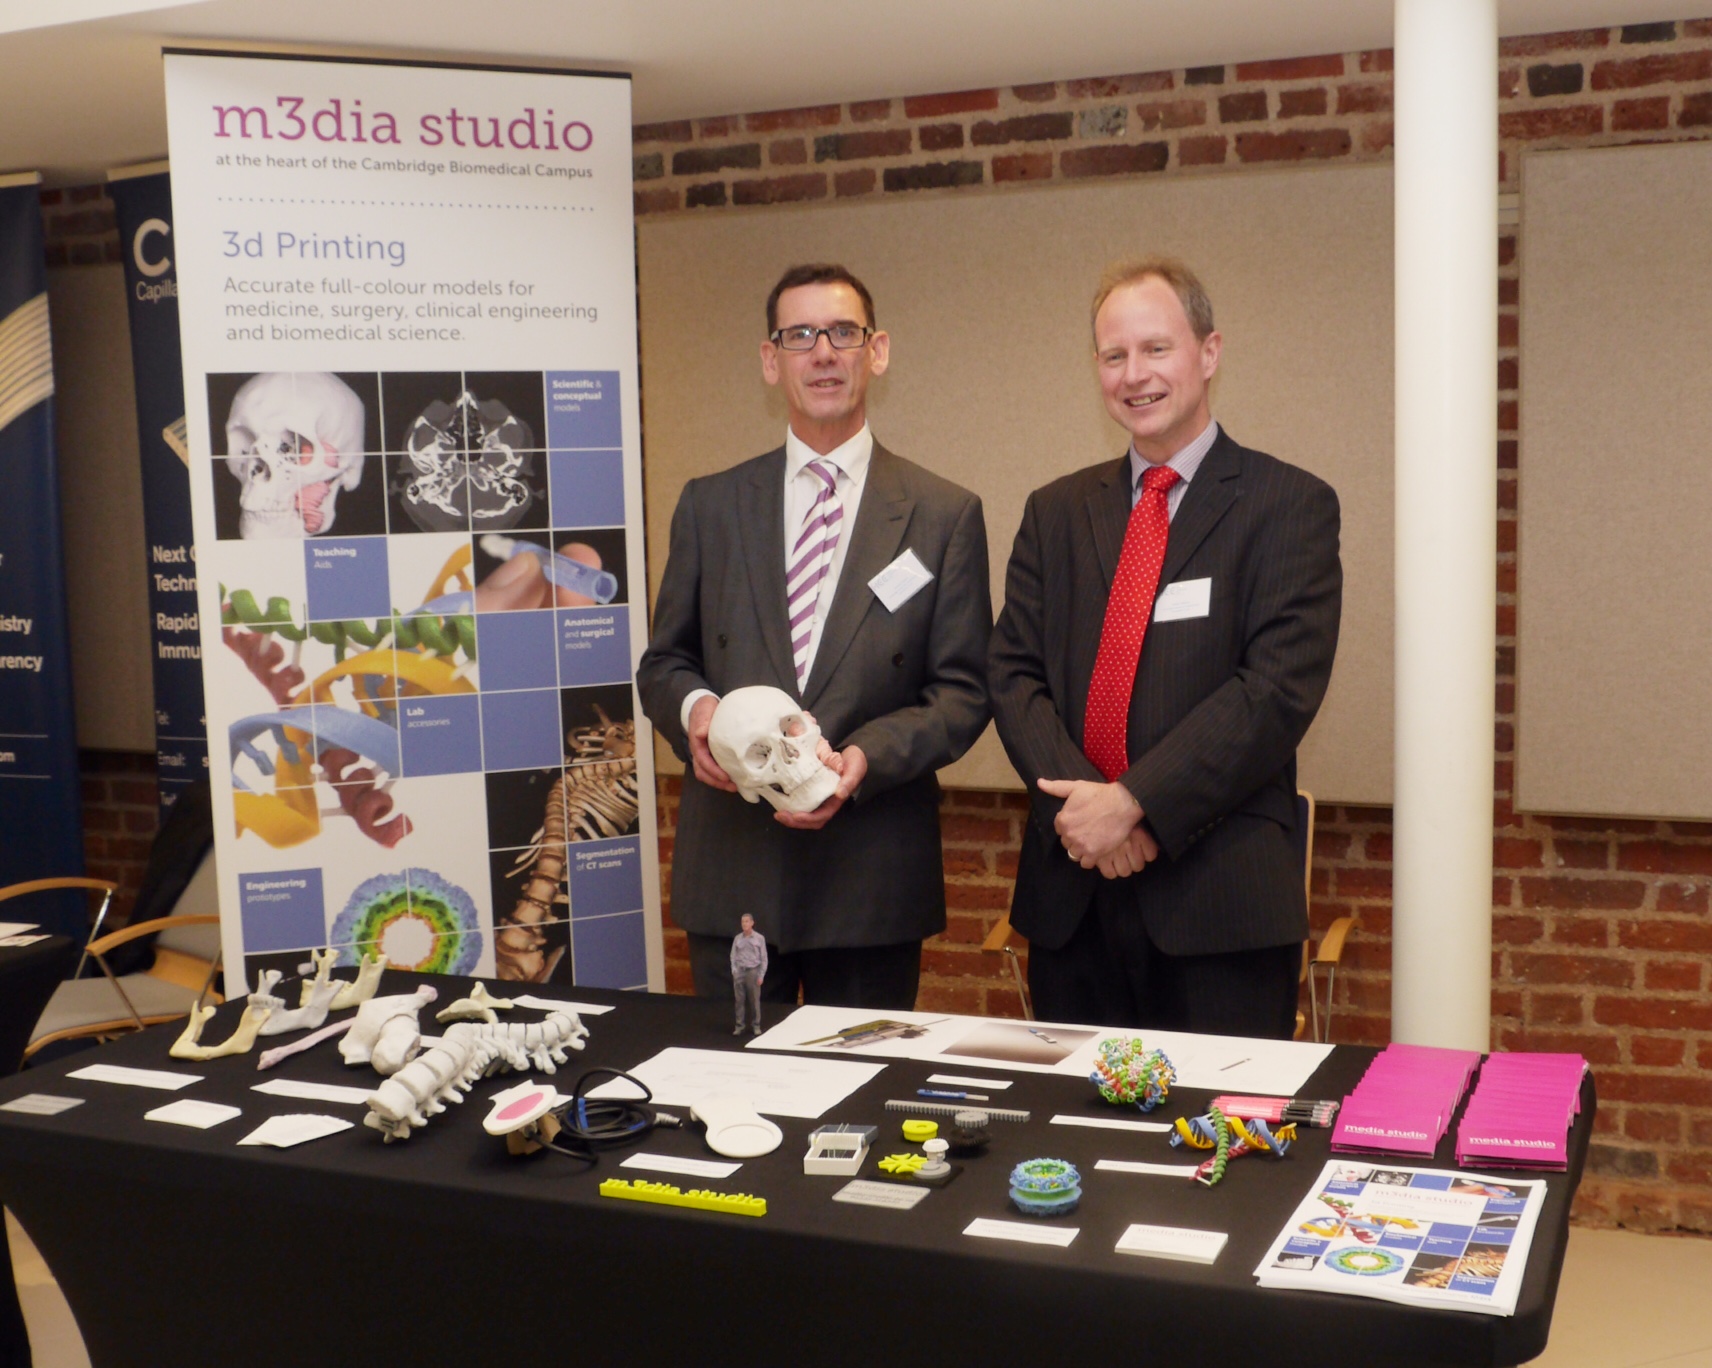 Jerry Nayler and James Hallinan with the Media Studio 3d Printing exhibition stand with anatomical, engineering and biochemical structural models